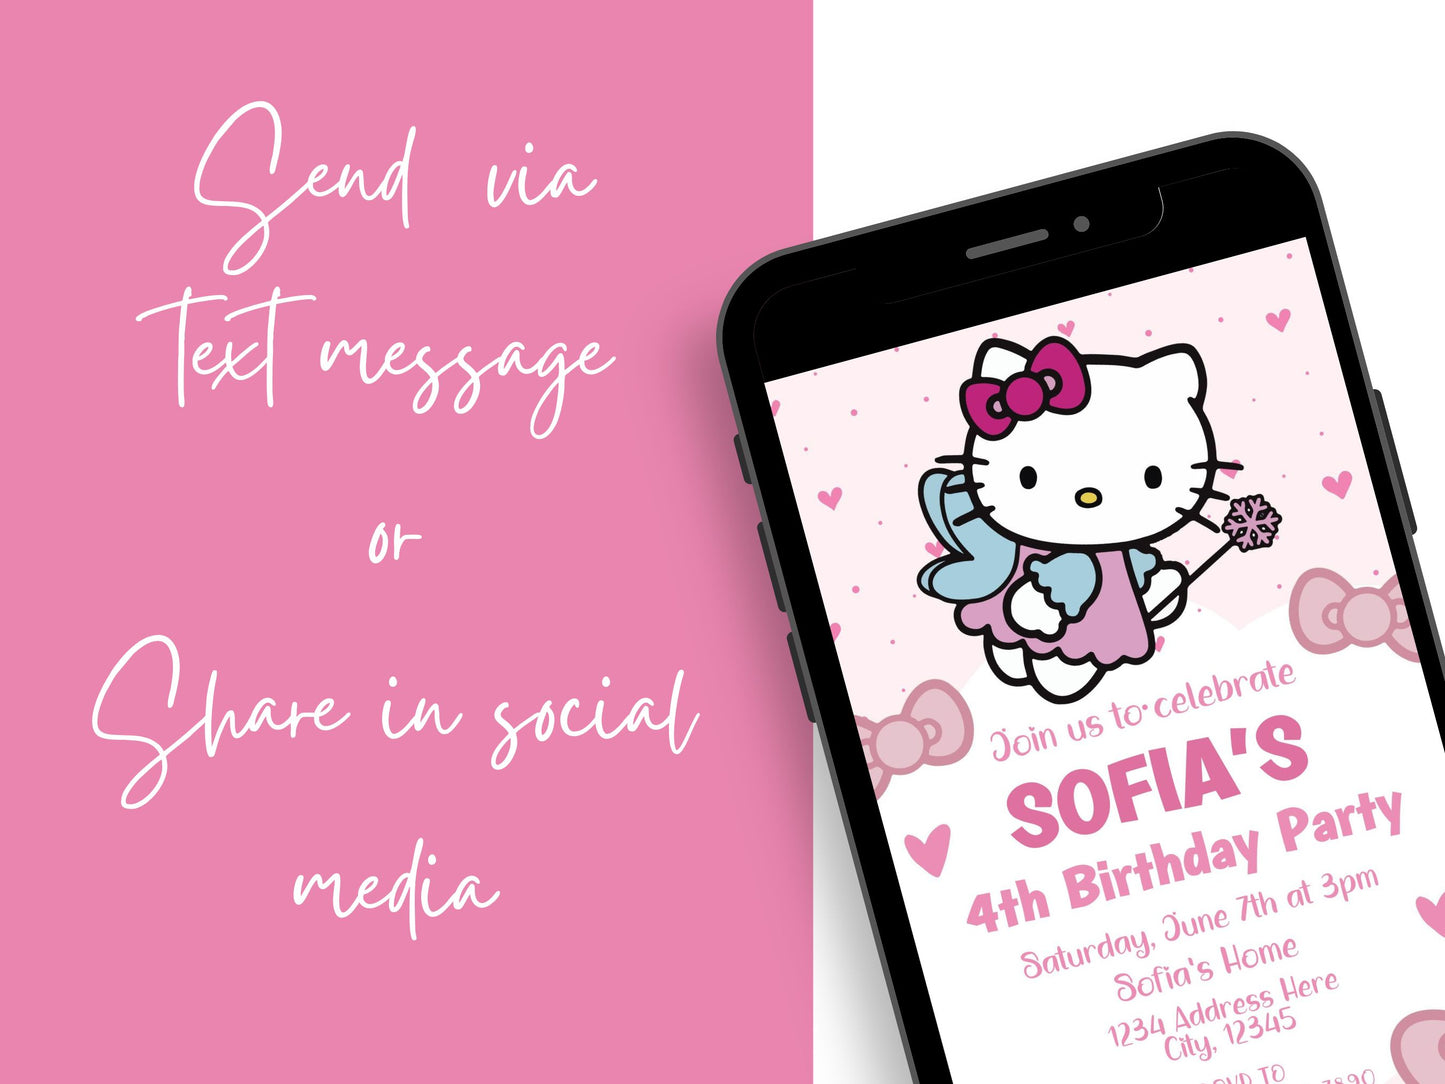 Editable Hello Kitty invitation template featuring vibrant colors and playful design elements